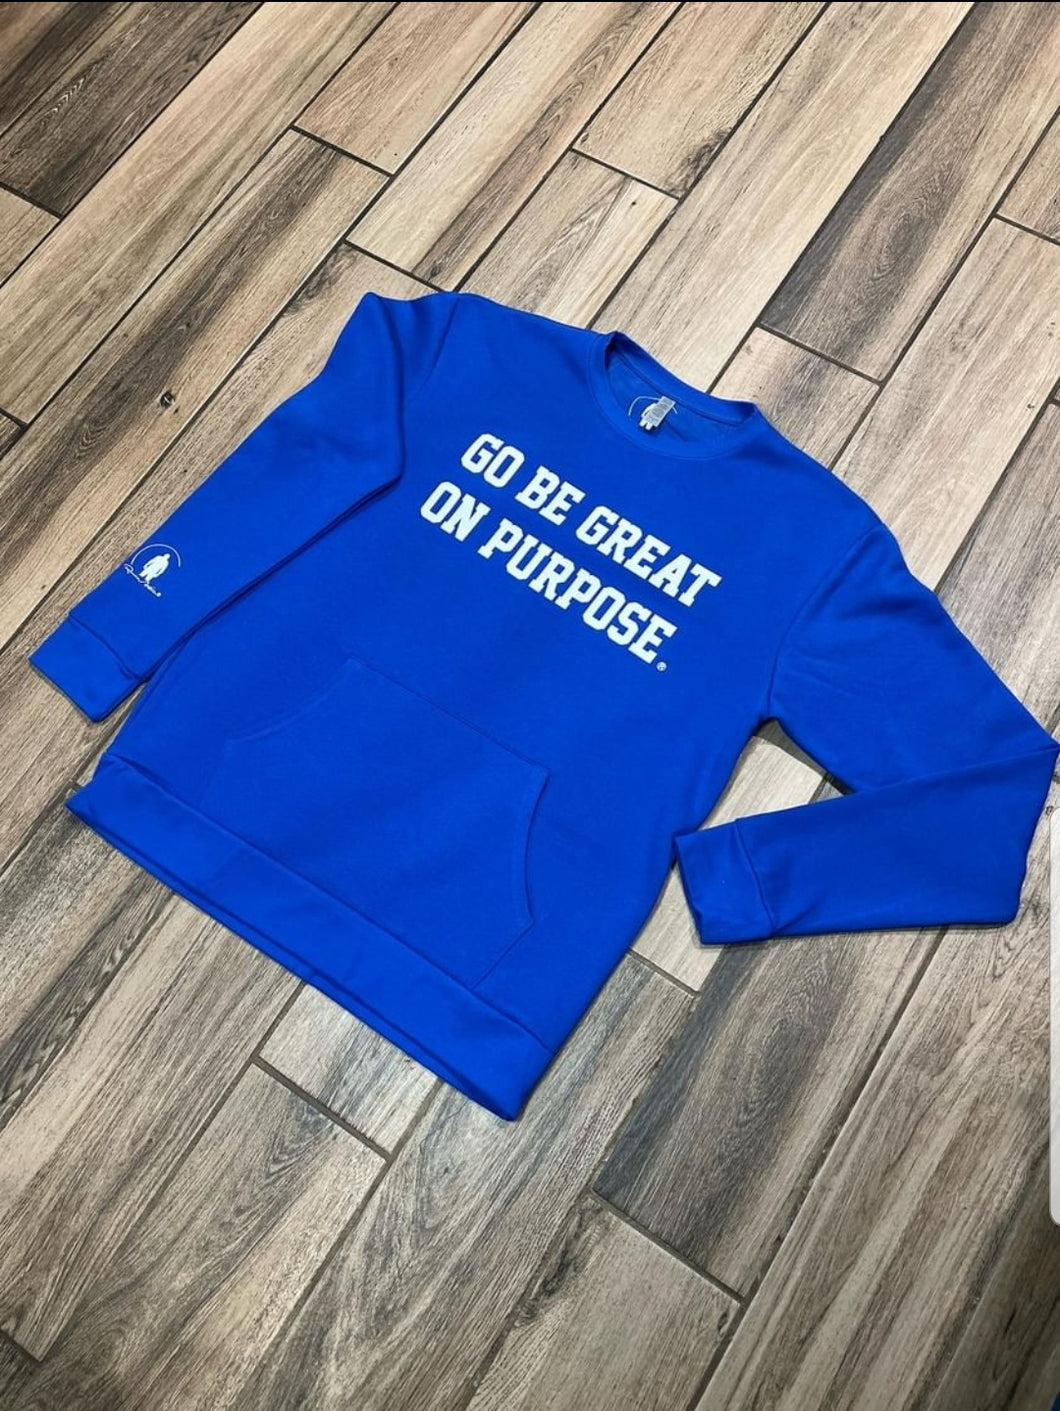 GBGOP Crewneck with pockets in front in Blue with white